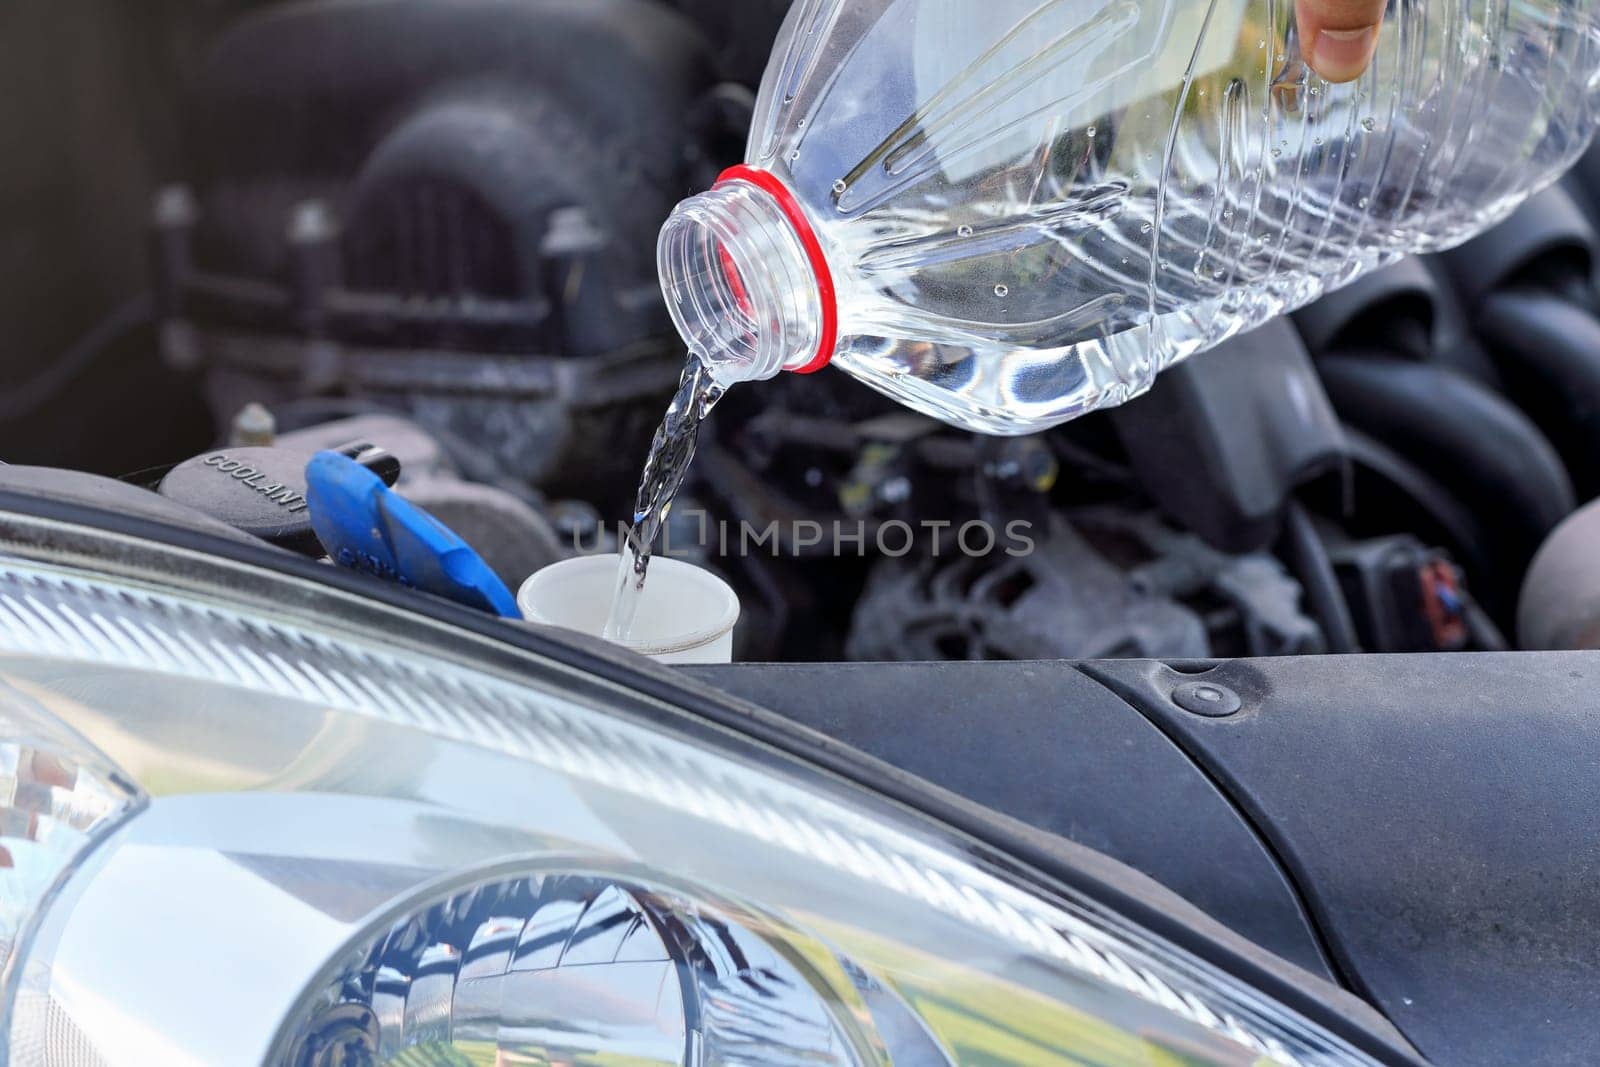 Pouring distilled water (ecological alternative to washing fluid) to washer tank in car, detail on liquid flowing from clear plastic bottle